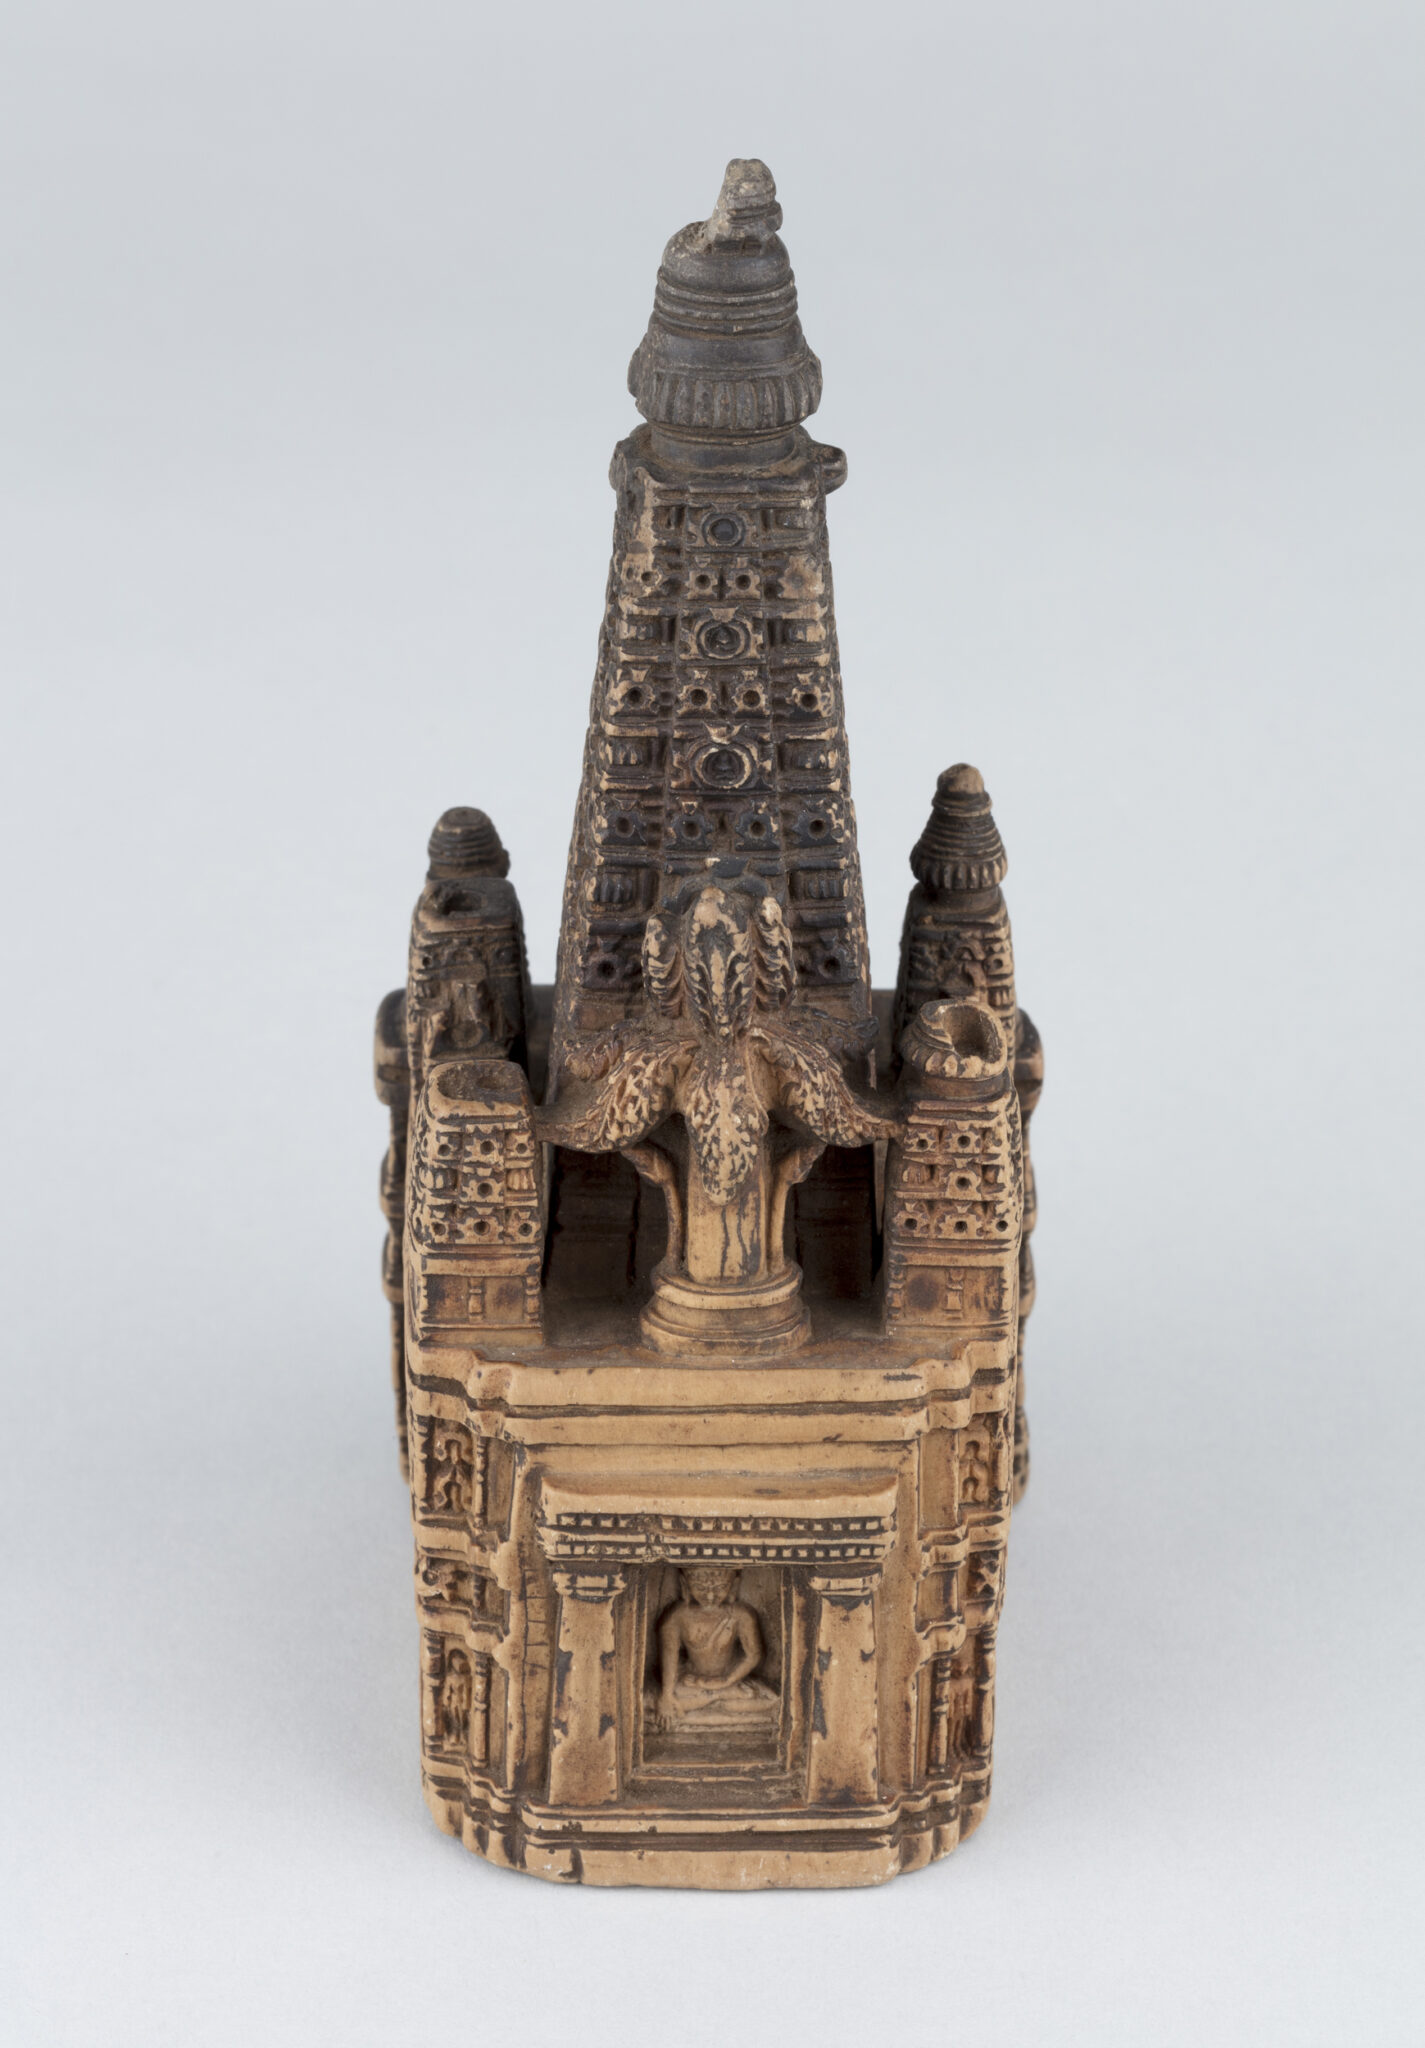 Side view of miniature architectural model with register of seated Buddhas at base and slender tapered roof